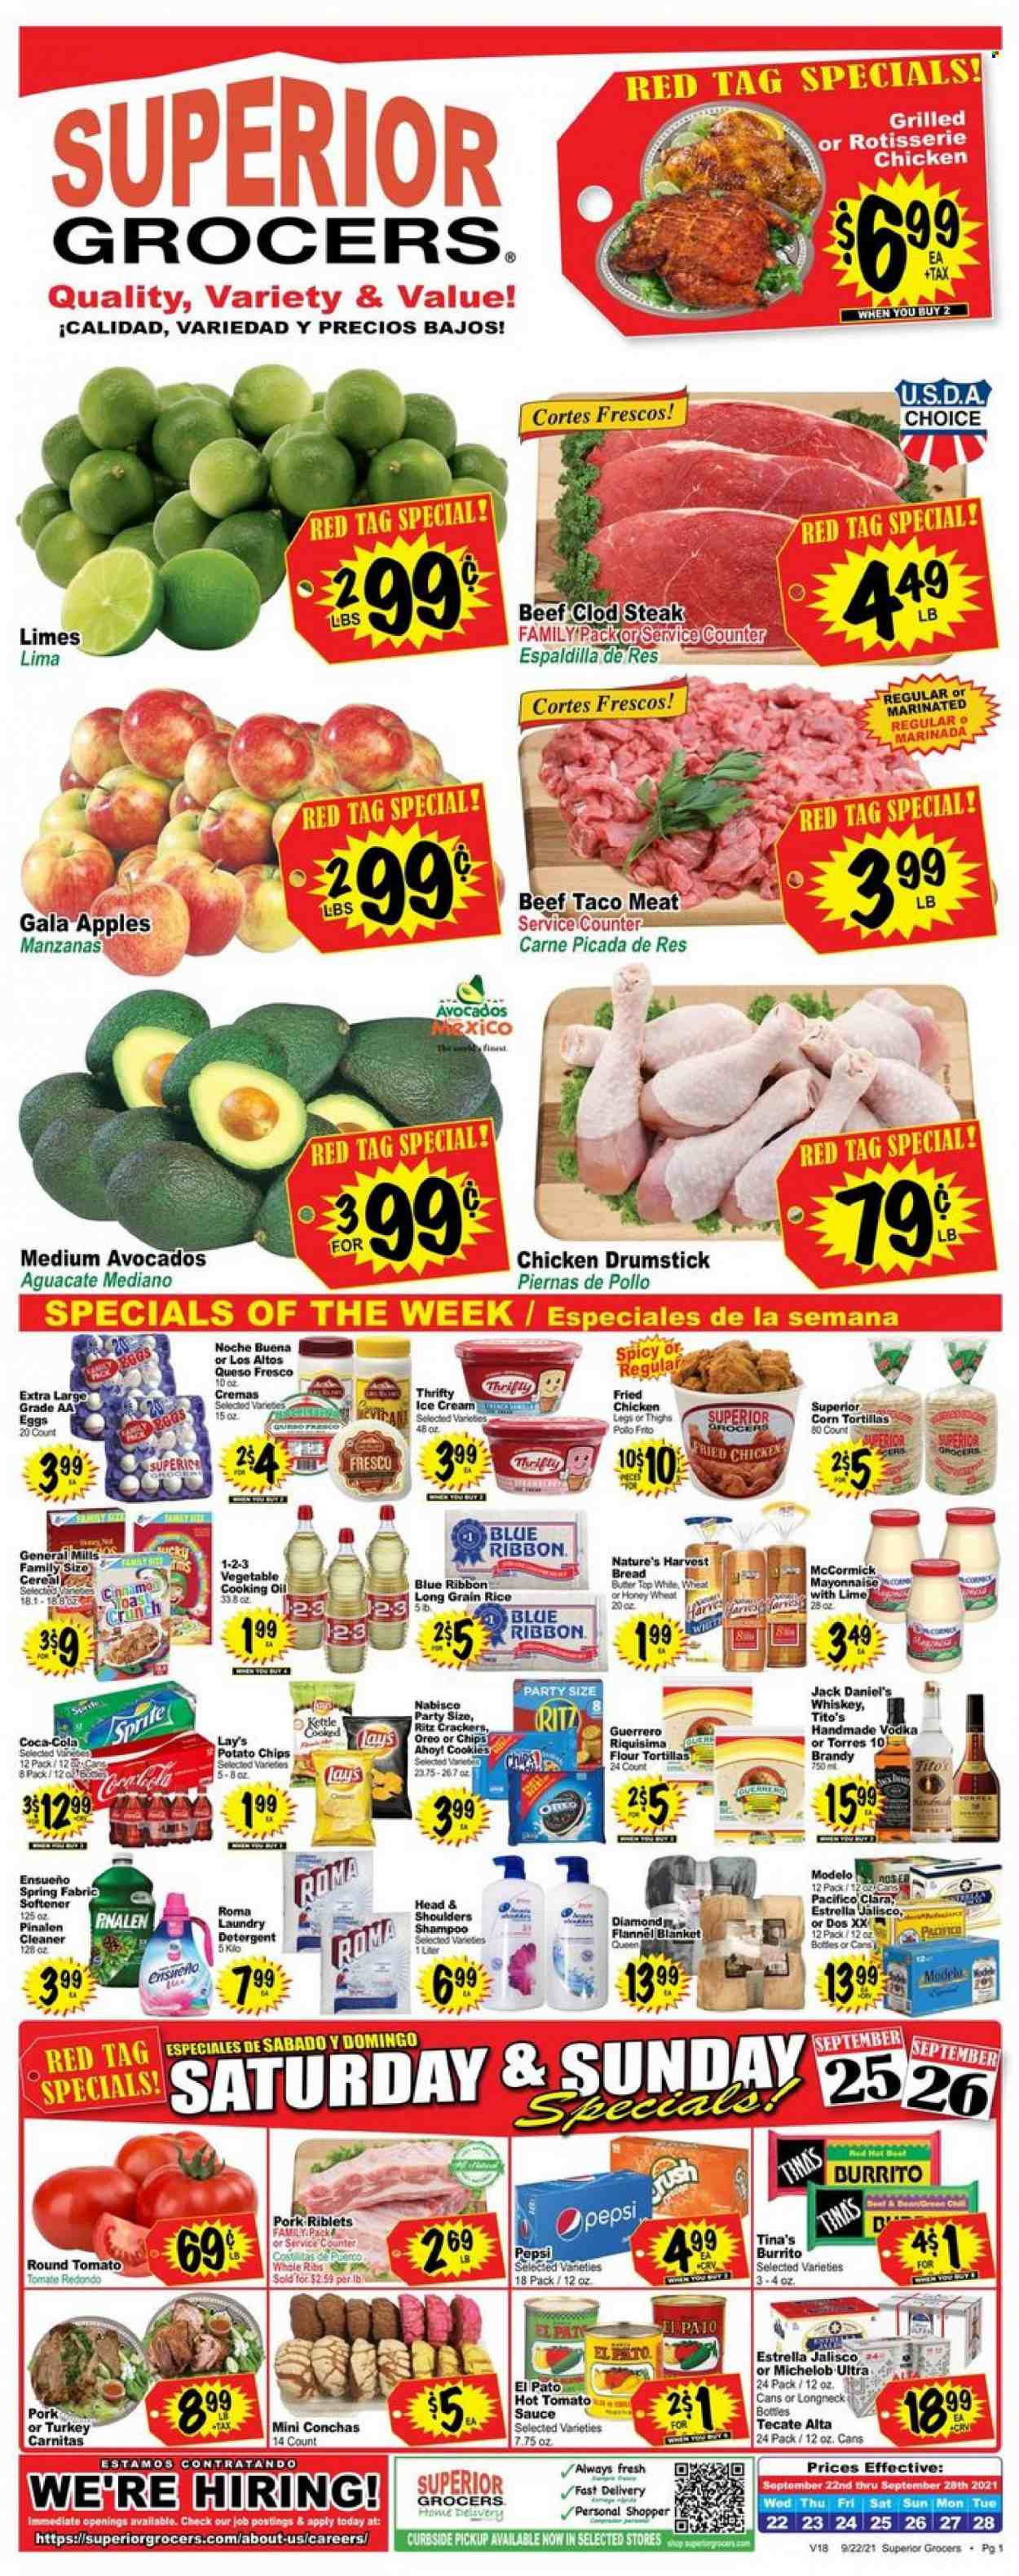 thumbnail - Superior Grocers Flyer - 09/22/2021 - 09/28/2021 - Sales products - bread, corn tortillas, tortillas, flour tortillas, apples, avocado, Gala, limes, steak, Jack Daniel's, chicken roast, sauce, fried chicken, burrito, queso fresco, eggs, butter, mayonnaise, ice cream, Ola, cookies, crackers, RITZ, potato chips, chips, Lay’s, tomato sauce, cereals, rice, long grain rice, cinnamon, oil, Coca-Cola, Sprite, Pepsi, brandy, vodka, whiskey, whisky, beer, Modelo, fabric softener, laundry detergent, Michelob. Page 1.